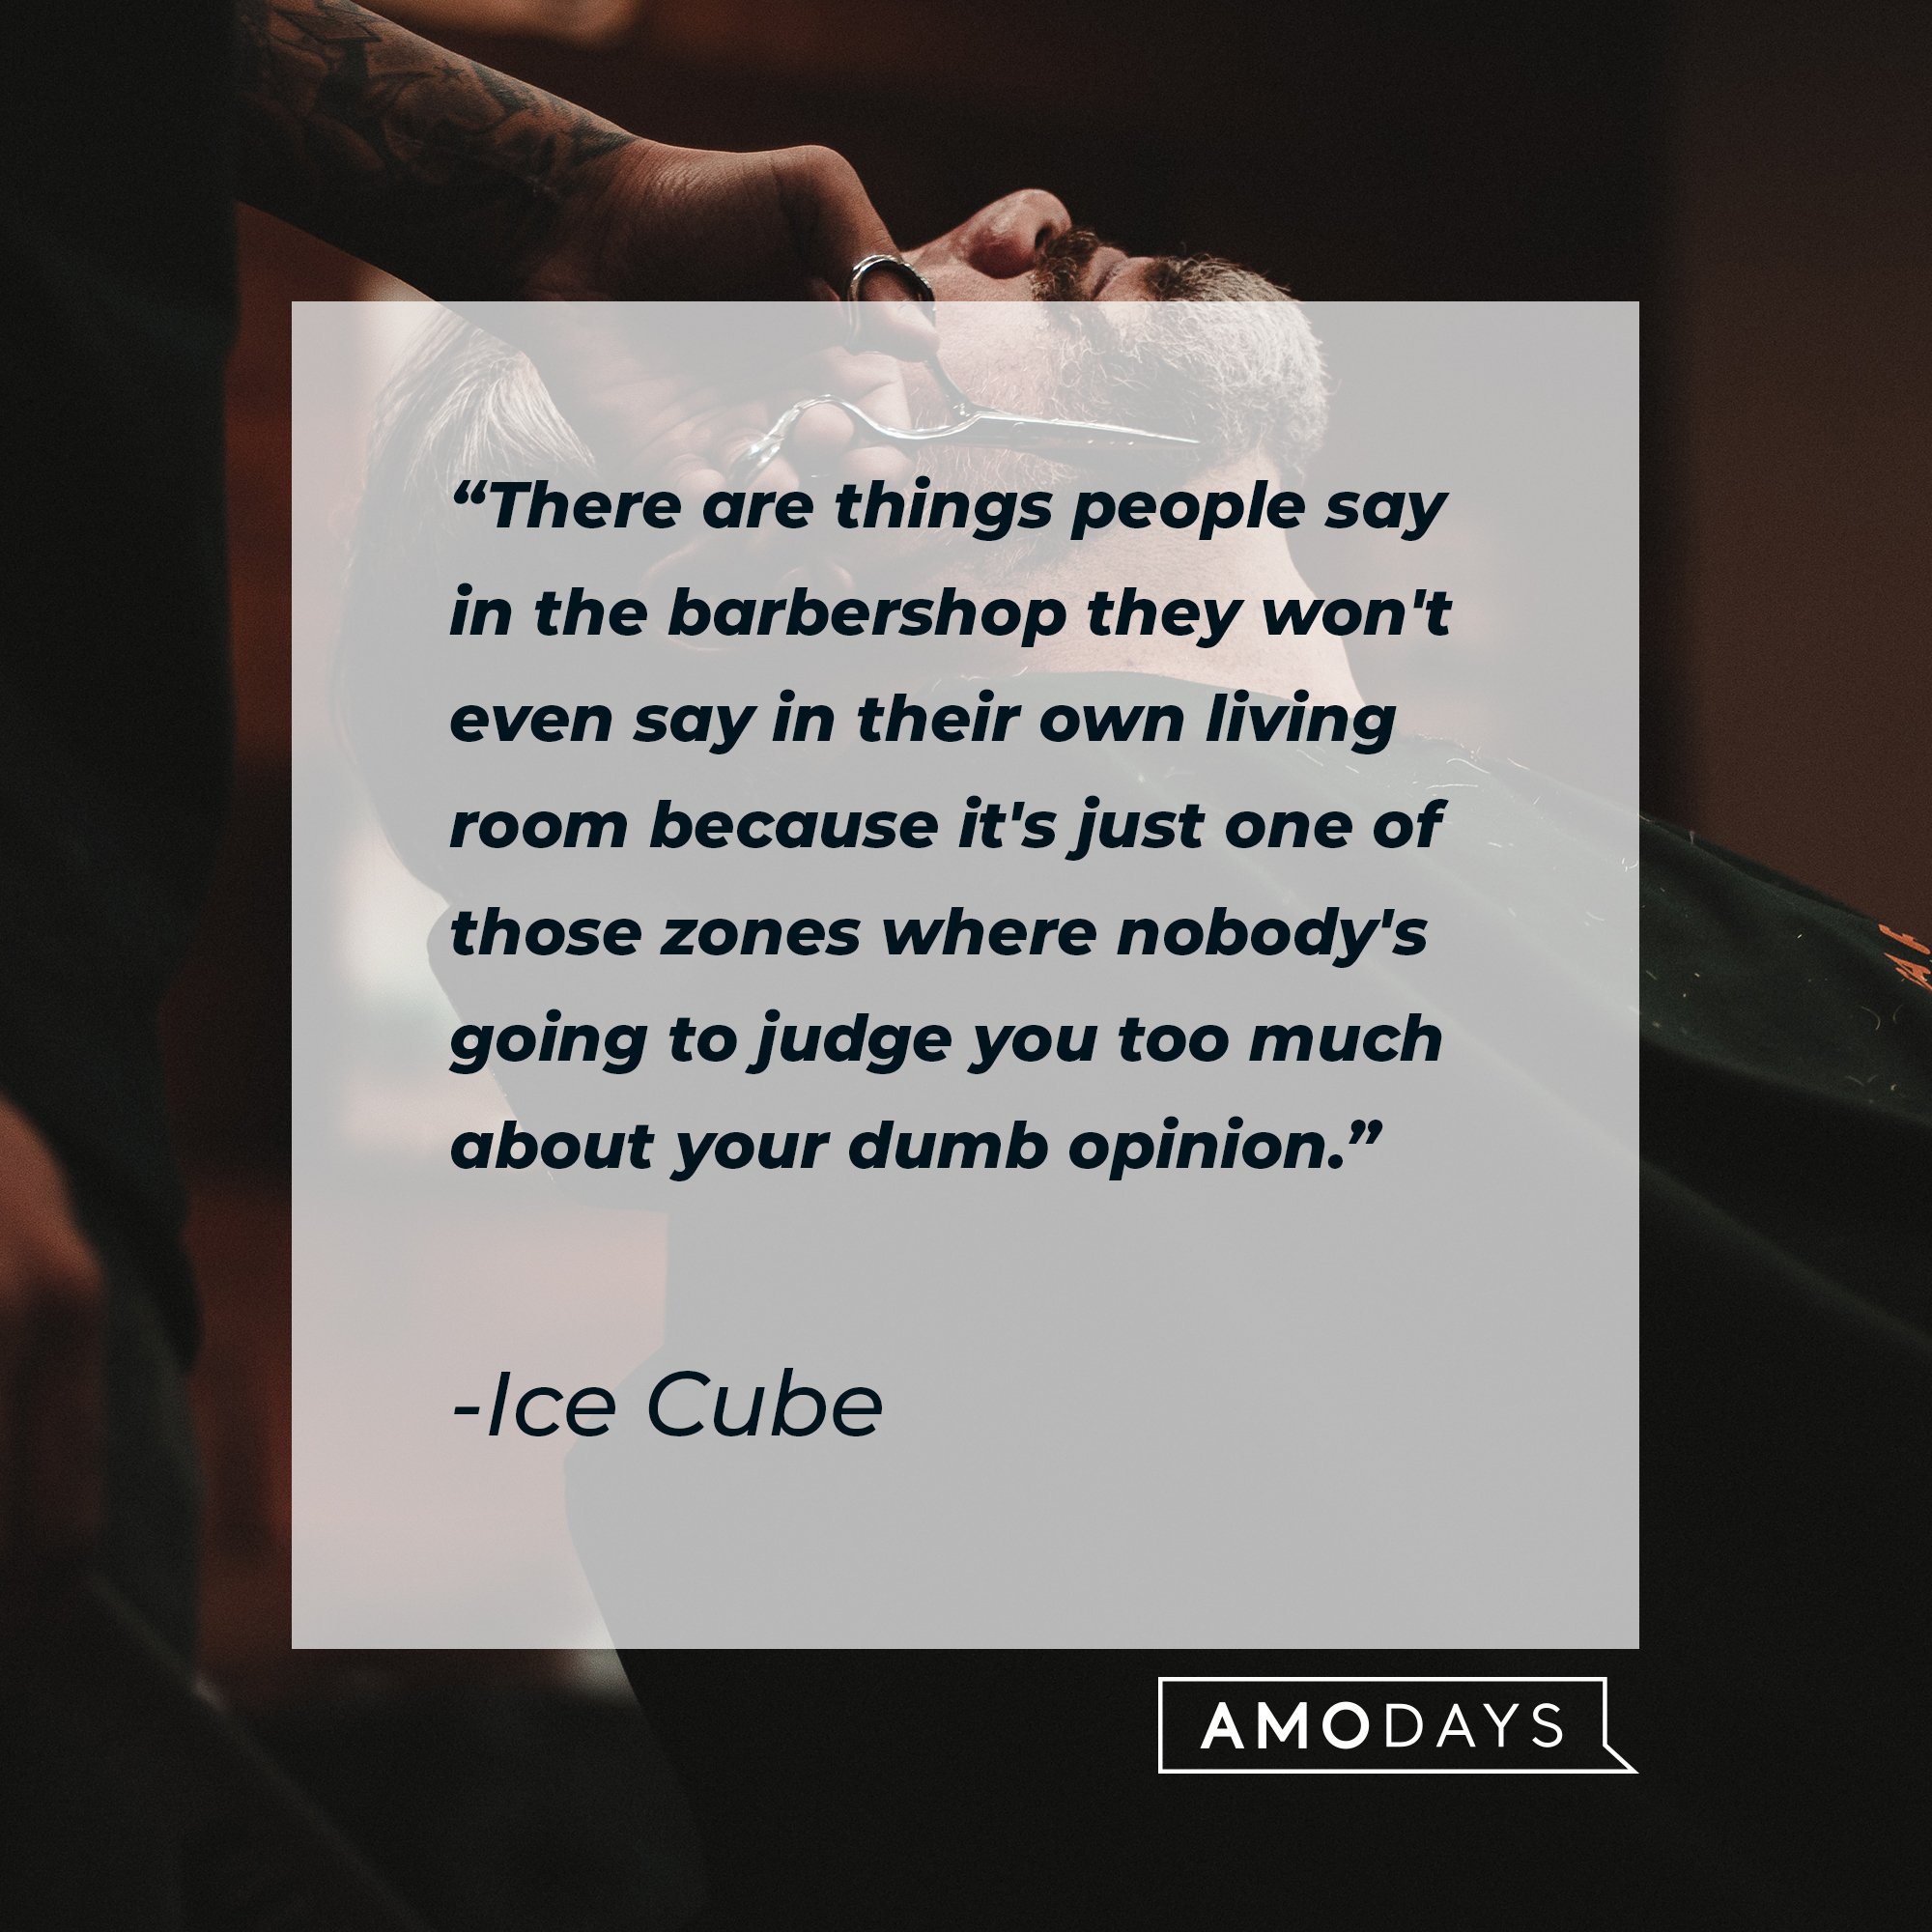 Ice Cube's quote: "There are things people say in the barbershop they won't even say in their own living room because it's just one of those zones where nobody's going to judge you too much about your dumb opinion." | Image: AmoDays